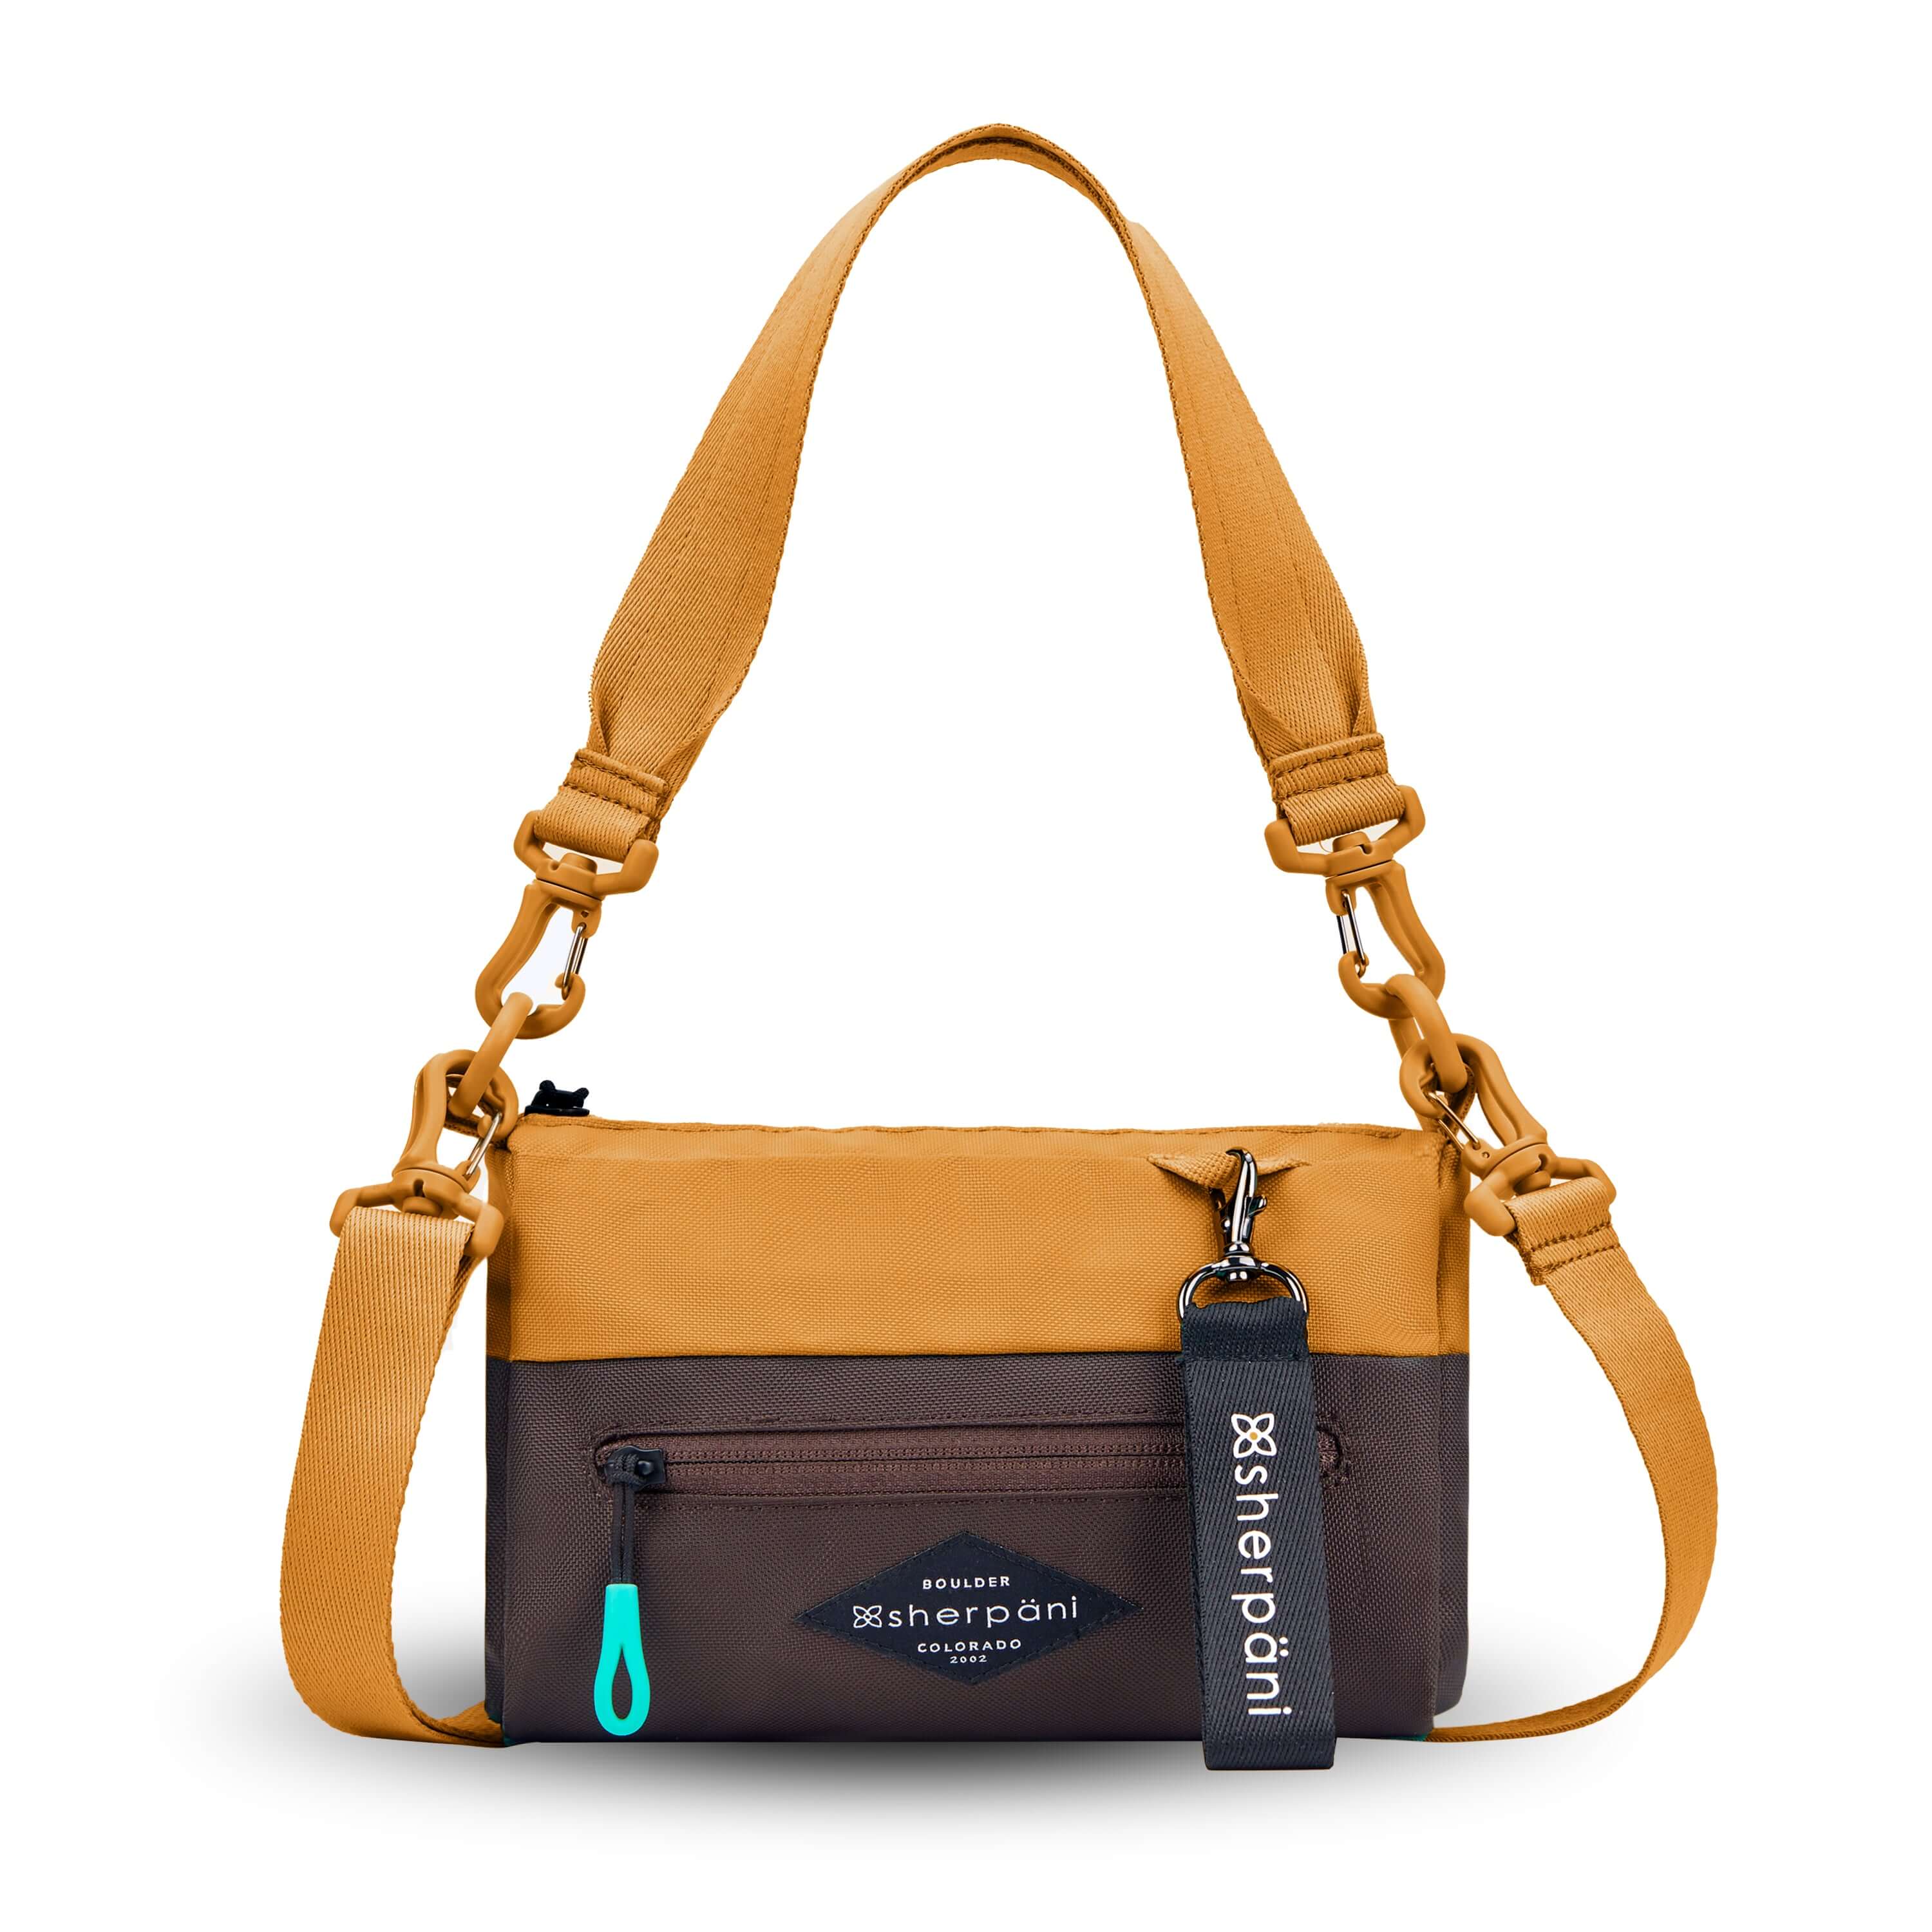 Flat front view of Sherpani's purse, the Skye in Sundial. It is two-toned, the top half of the bag is burnt yellow and the bottom half of the bag is brown. There is an external zipper compartment with an easy-pull zipper accented in aqua. There is a branded Sherpani keychain clipped to the upper right corner. The bag has a detachable short strap and a longer detachable/adjustable crossbody strap. 